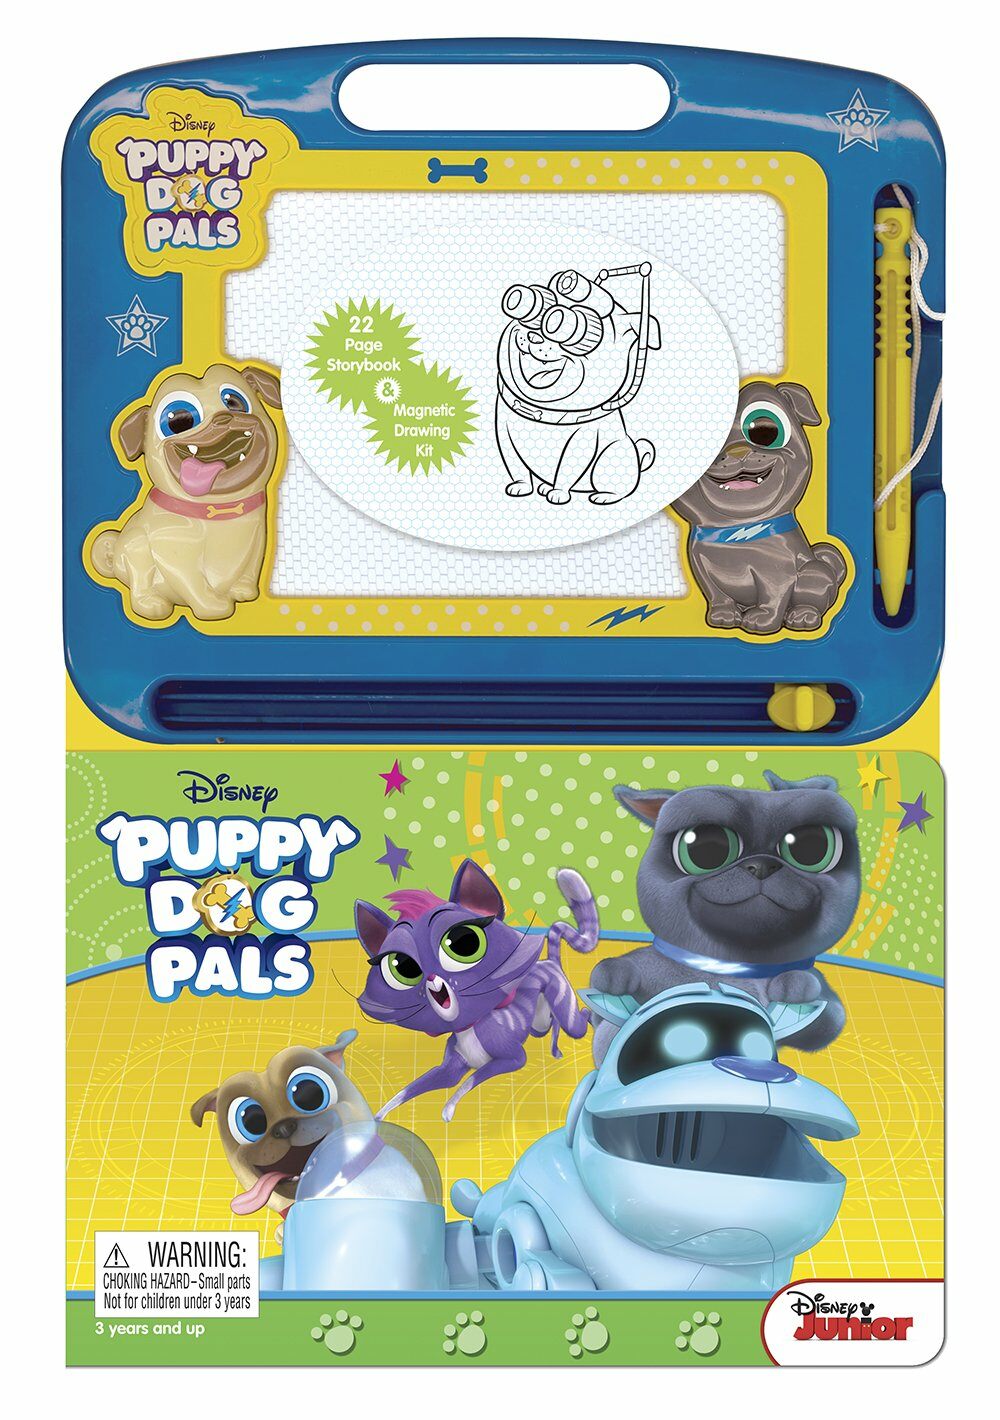 Learning Series : Disney Jr. Puppy Dog Pals (Board Book)